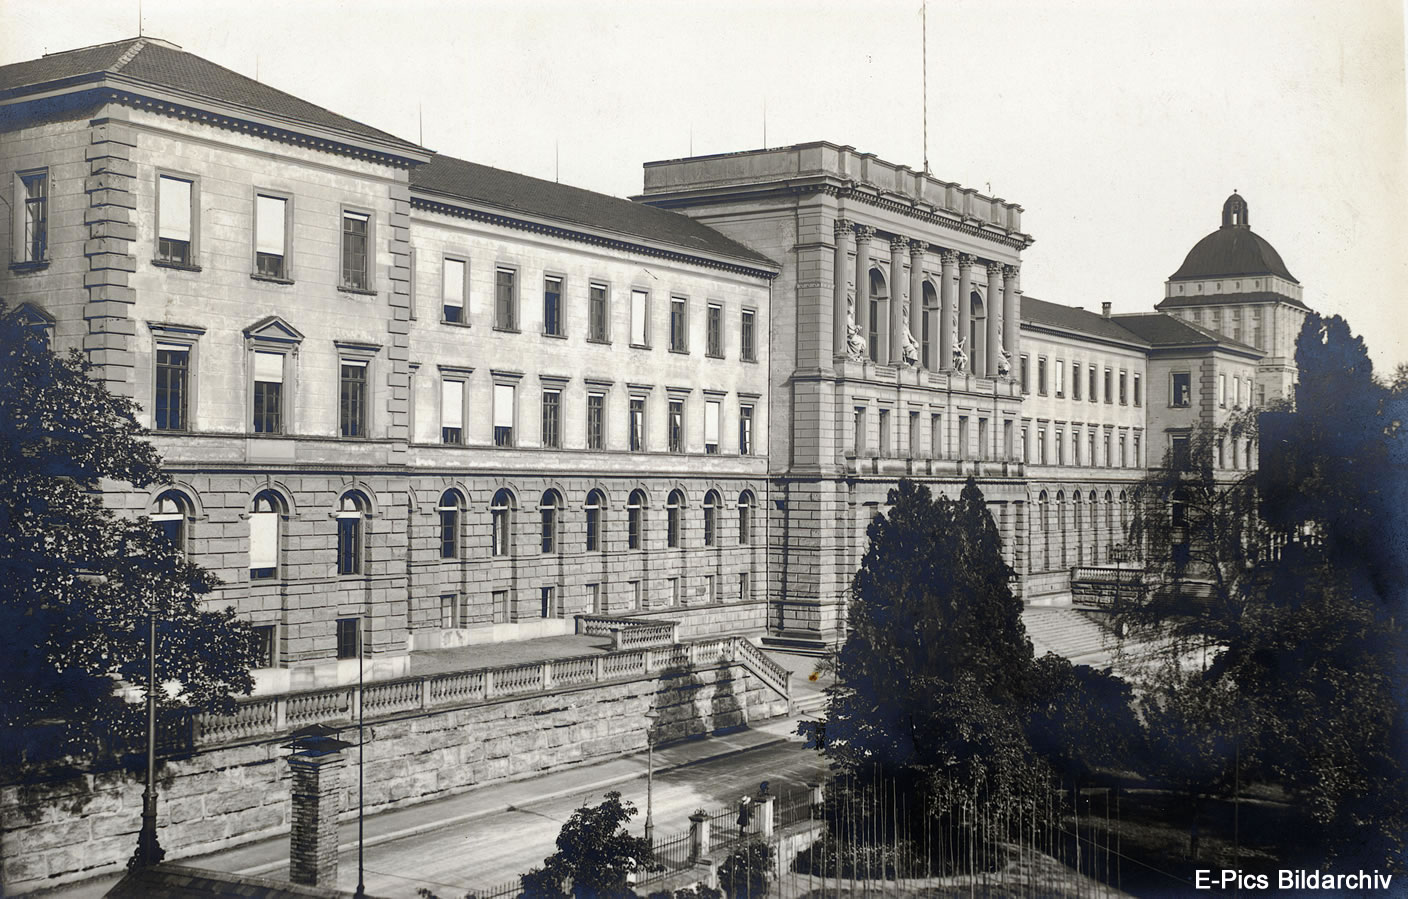 The main building of ETH Zurich seen from the Polybahn